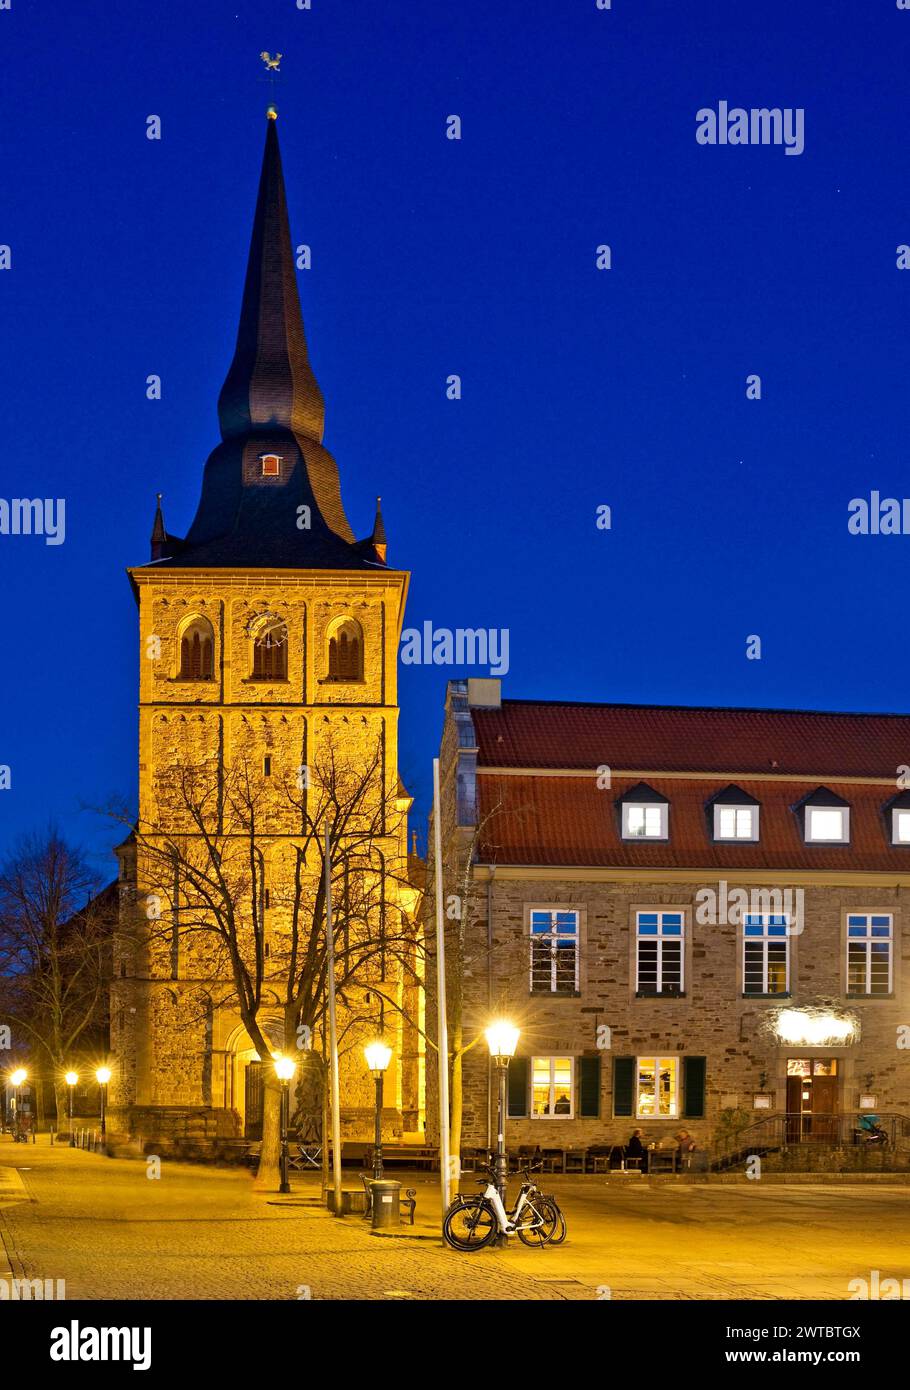 Market square with St Peter and Paul Church and community centre in the evening, Old Town, Ratingen, Bergisches Land, North Rhine-Westphalia, Germany Stock Photo